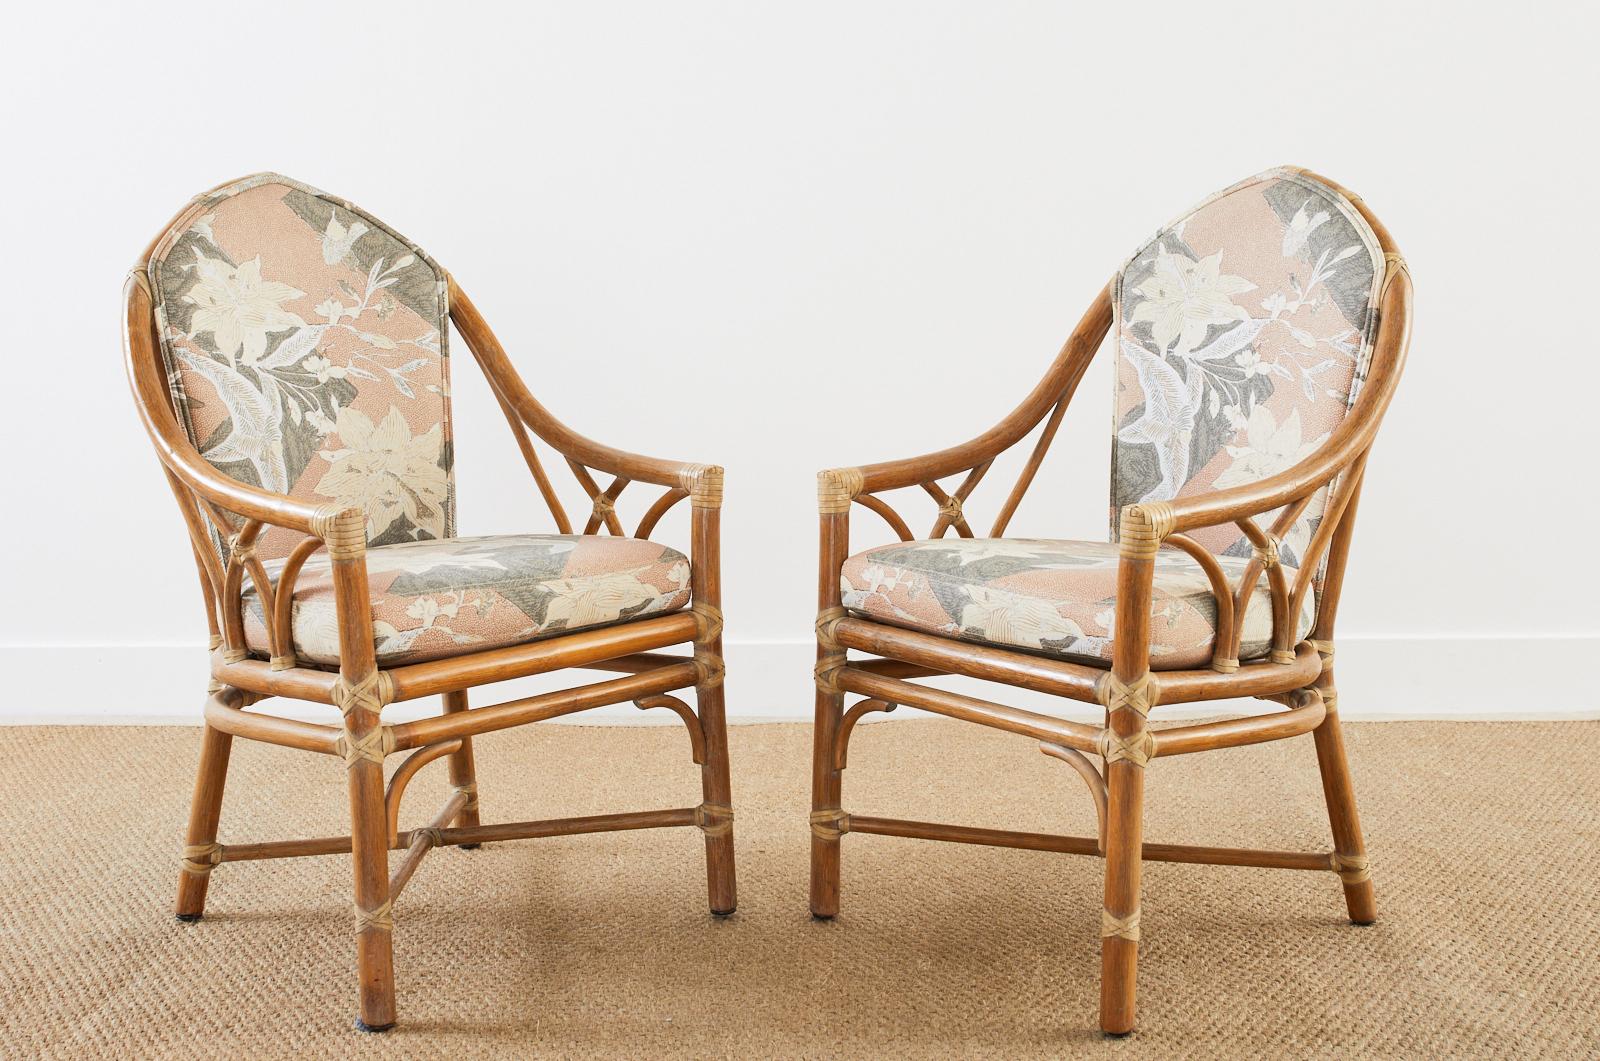 Gorgeous pair of genuine McGuire rattan dining armchairs featuring a lovely floral print fabric upholstery. Made in the California organic modern style constructed from rattan poles lashed together with leather rawhide laces. The backs and sides